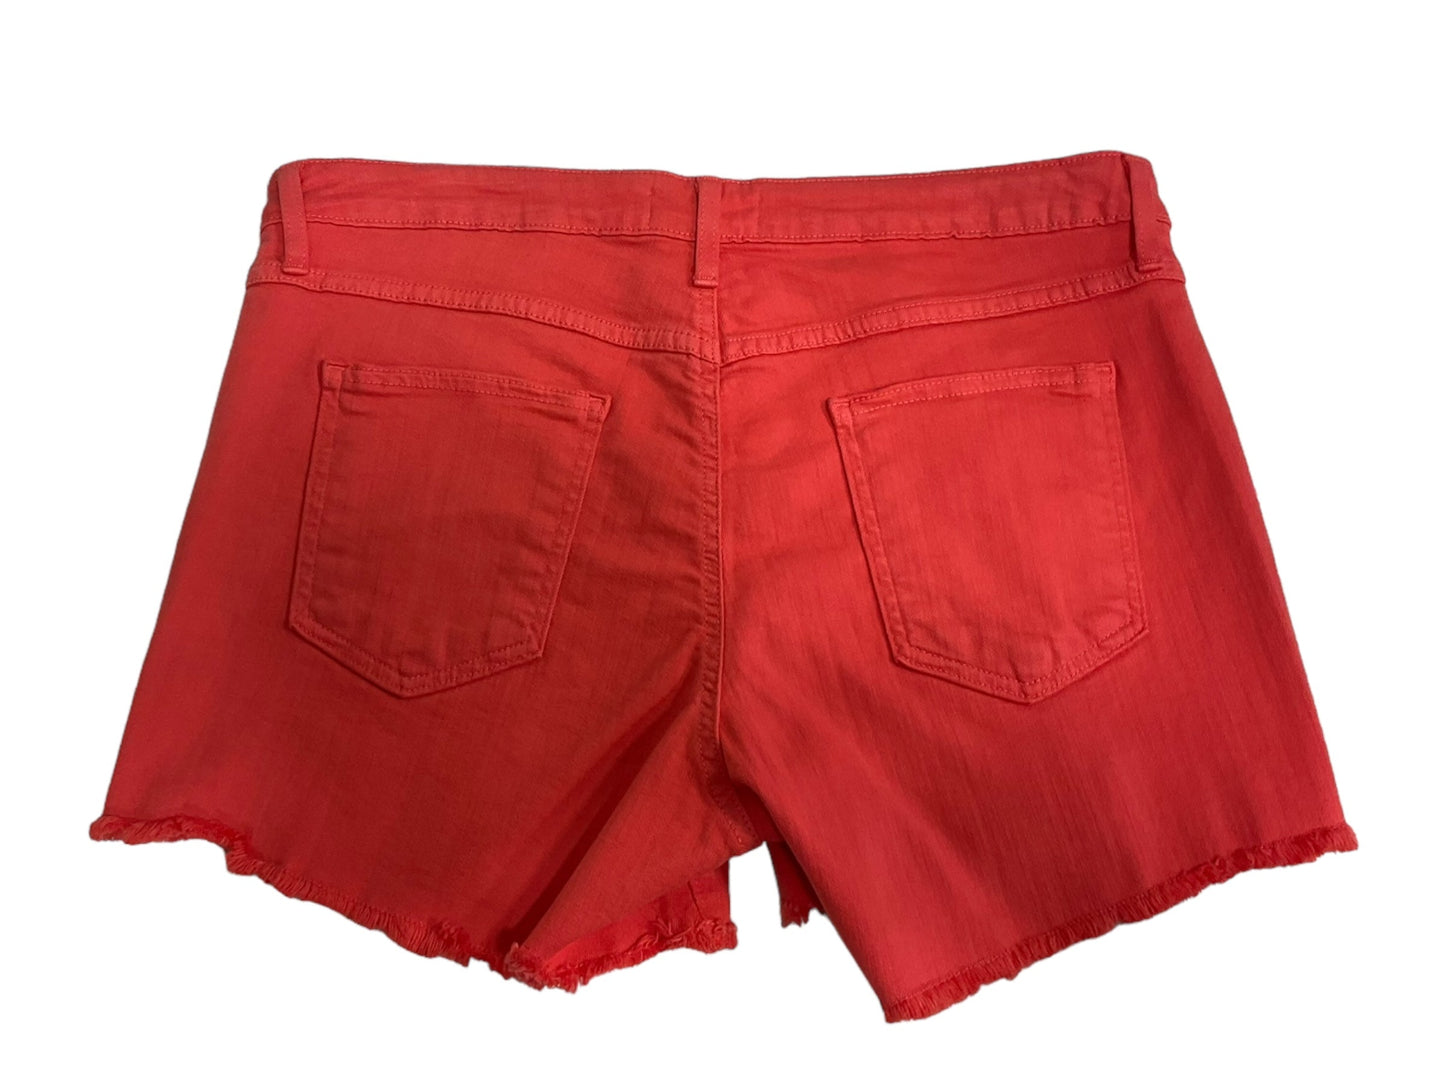 Coral Shorts Clothes Mentor, Size 14